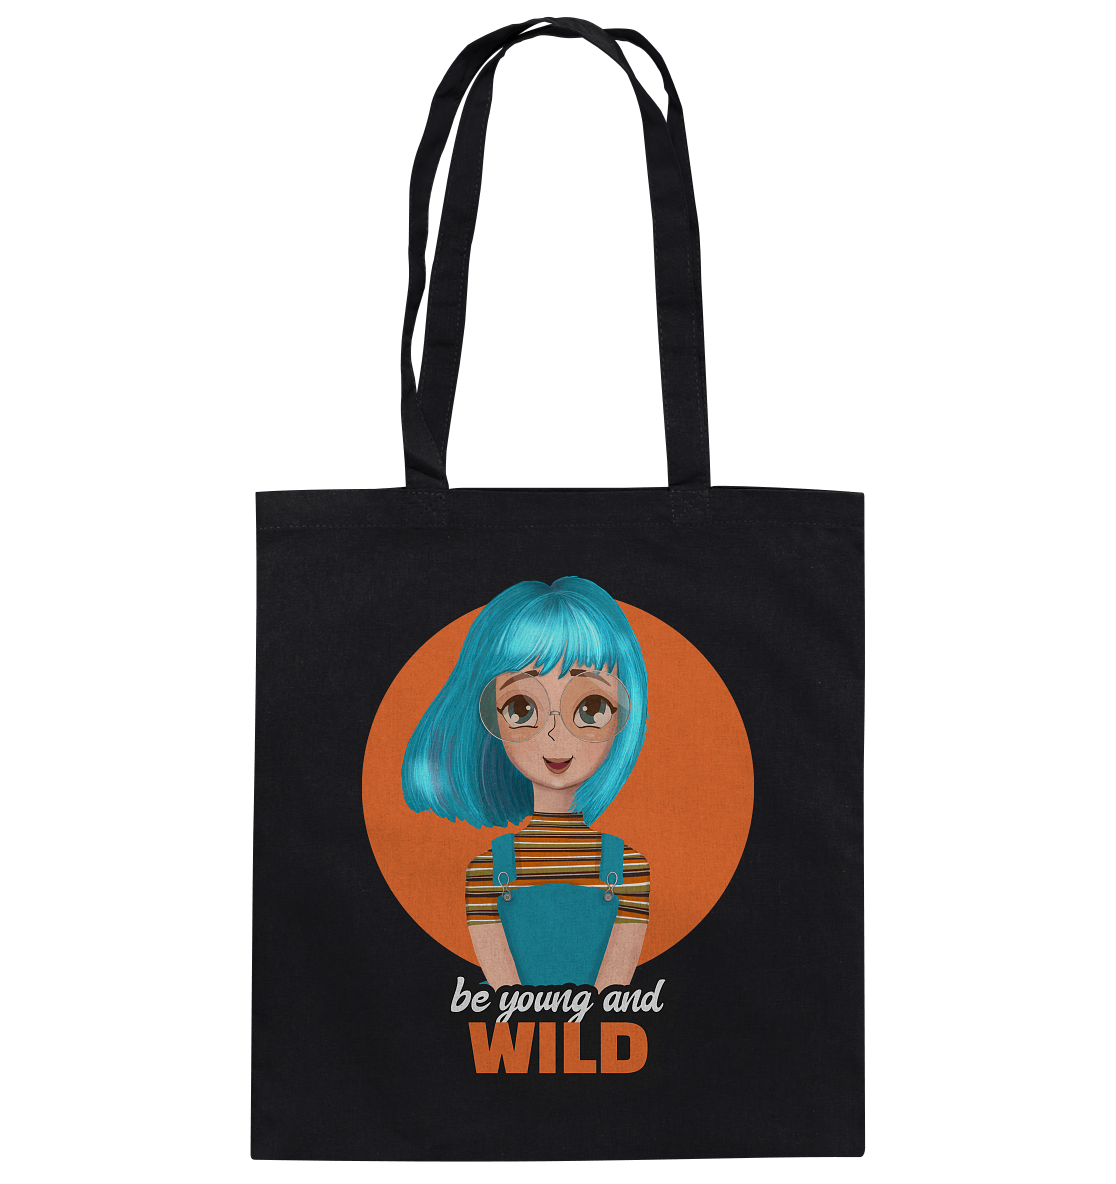 CArtoon Stofftasche be young and wild mit Cartoon Girl türkis